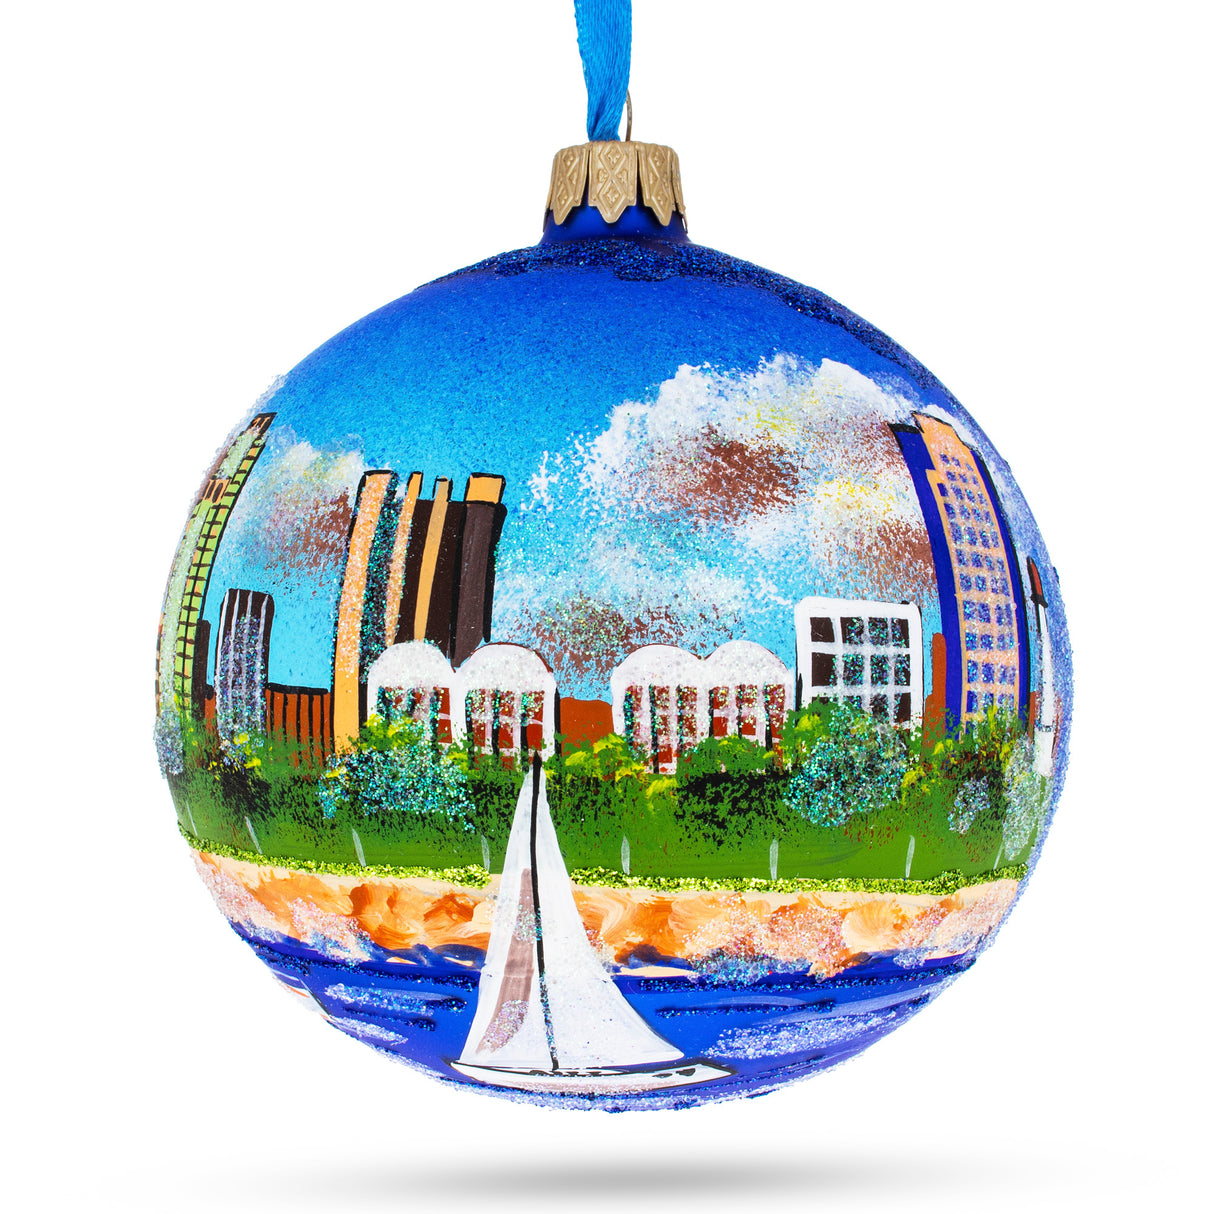 Long Beach, California, USA Glass Ball Christmas Ornament 4 Inches in Multi color, Round shape